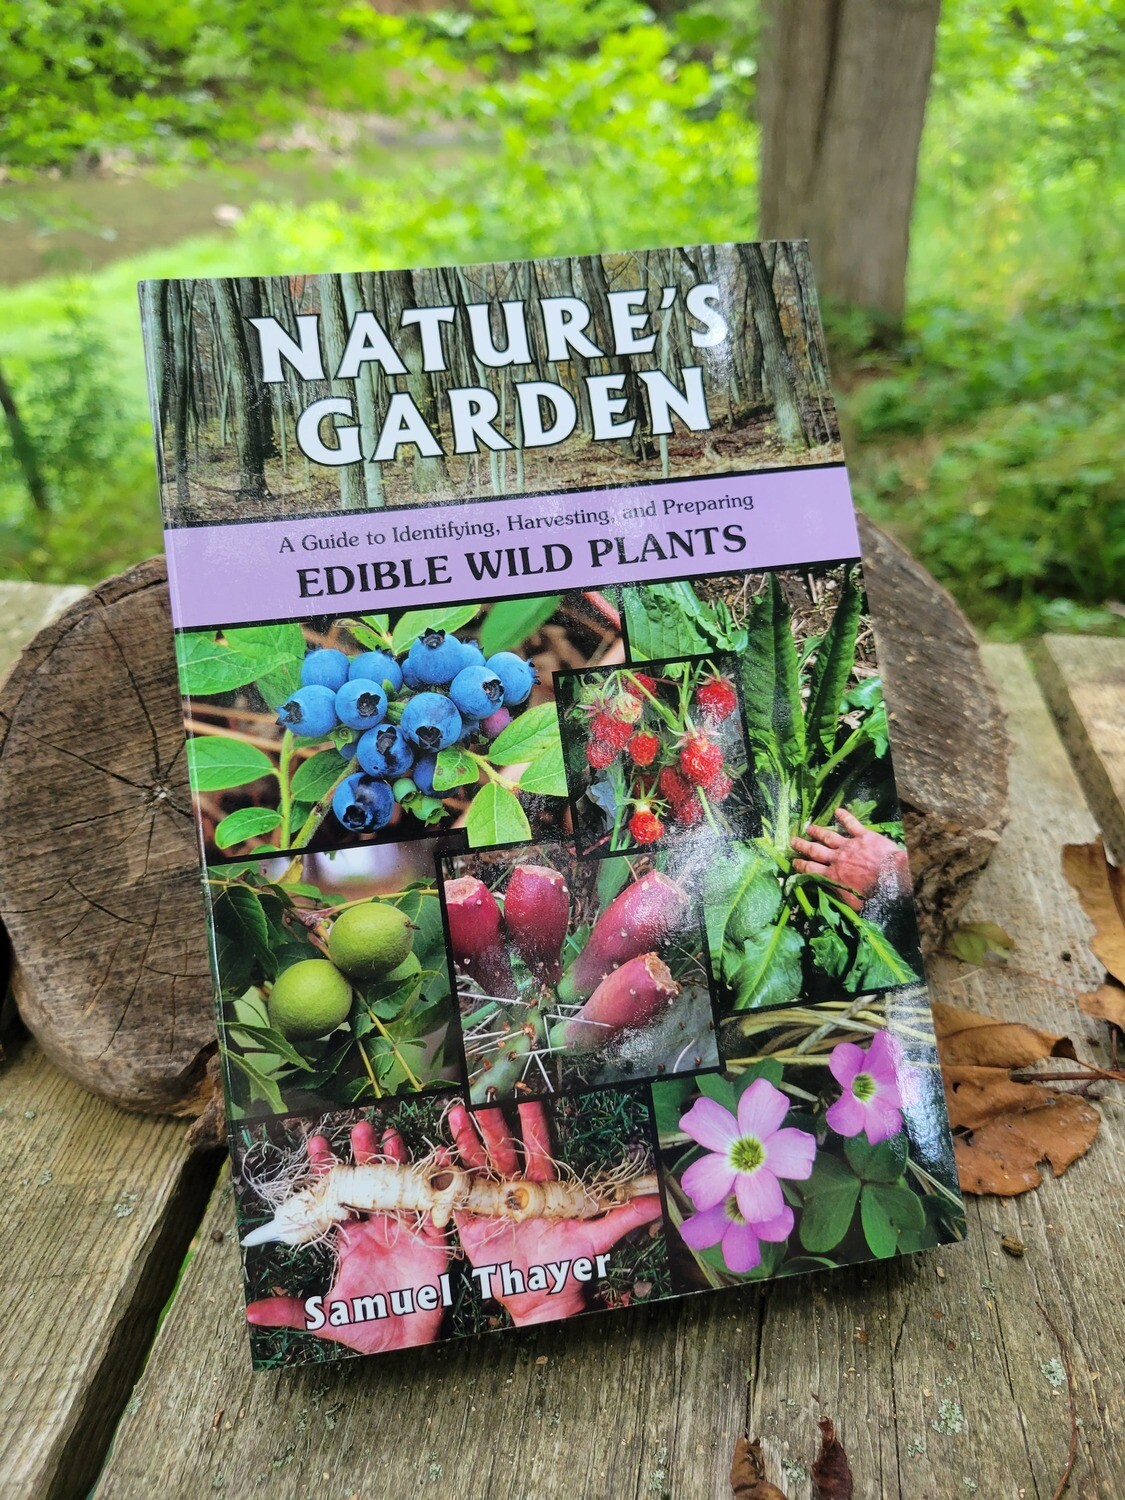 Nature's Garden: A Guide to Identifying, Harvesting, and Preparing Edible Wild Plants by Samuel Thayer